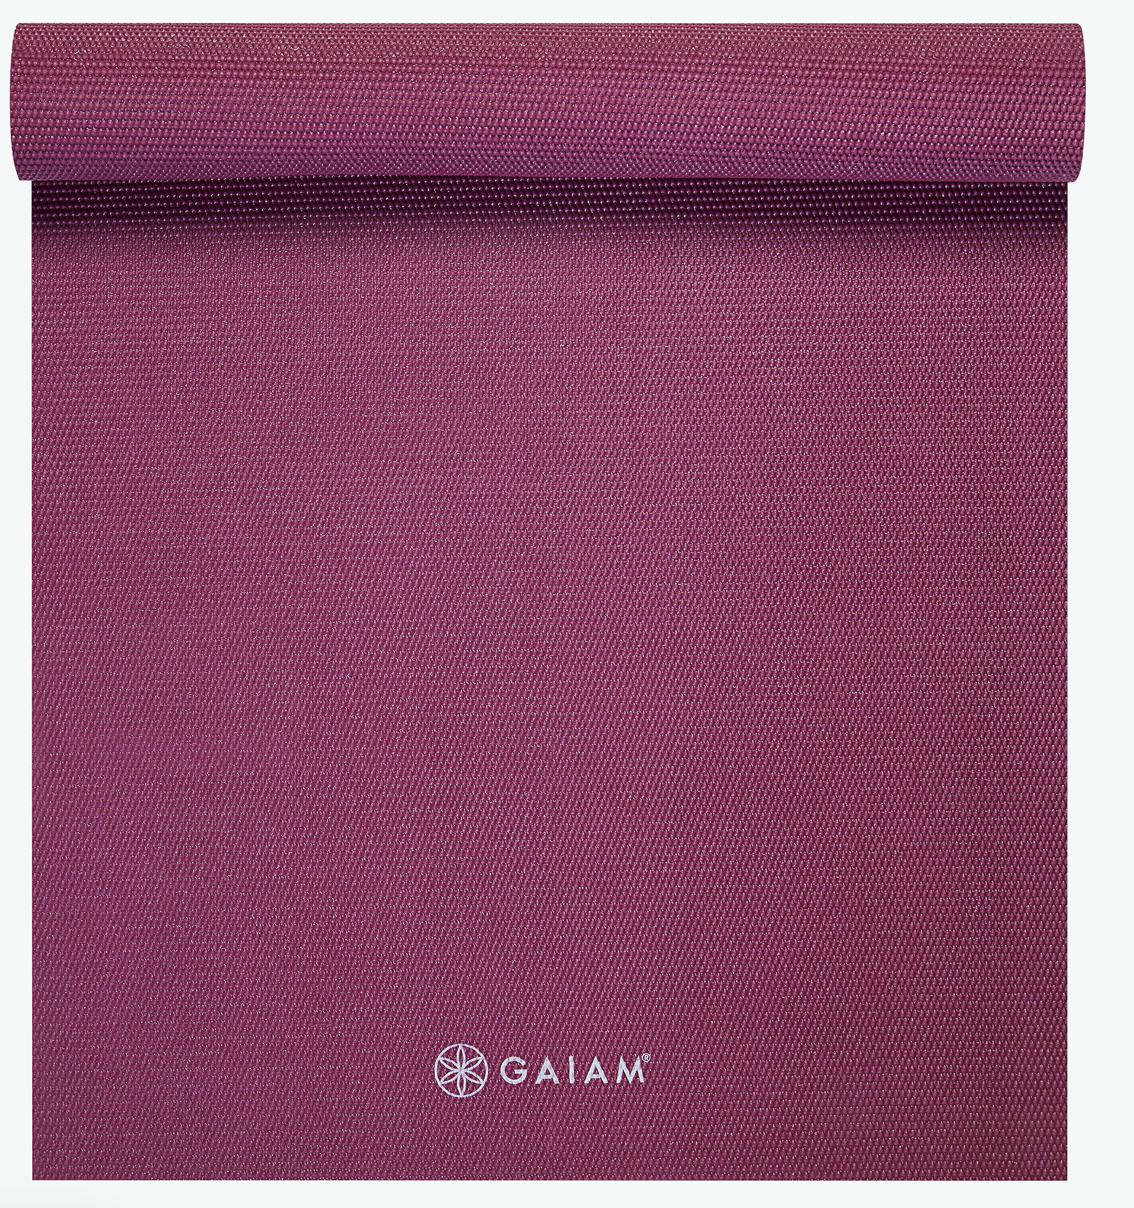 CLASSIC SOLID COLOR YOGA MATS (5MM) - Mulberry